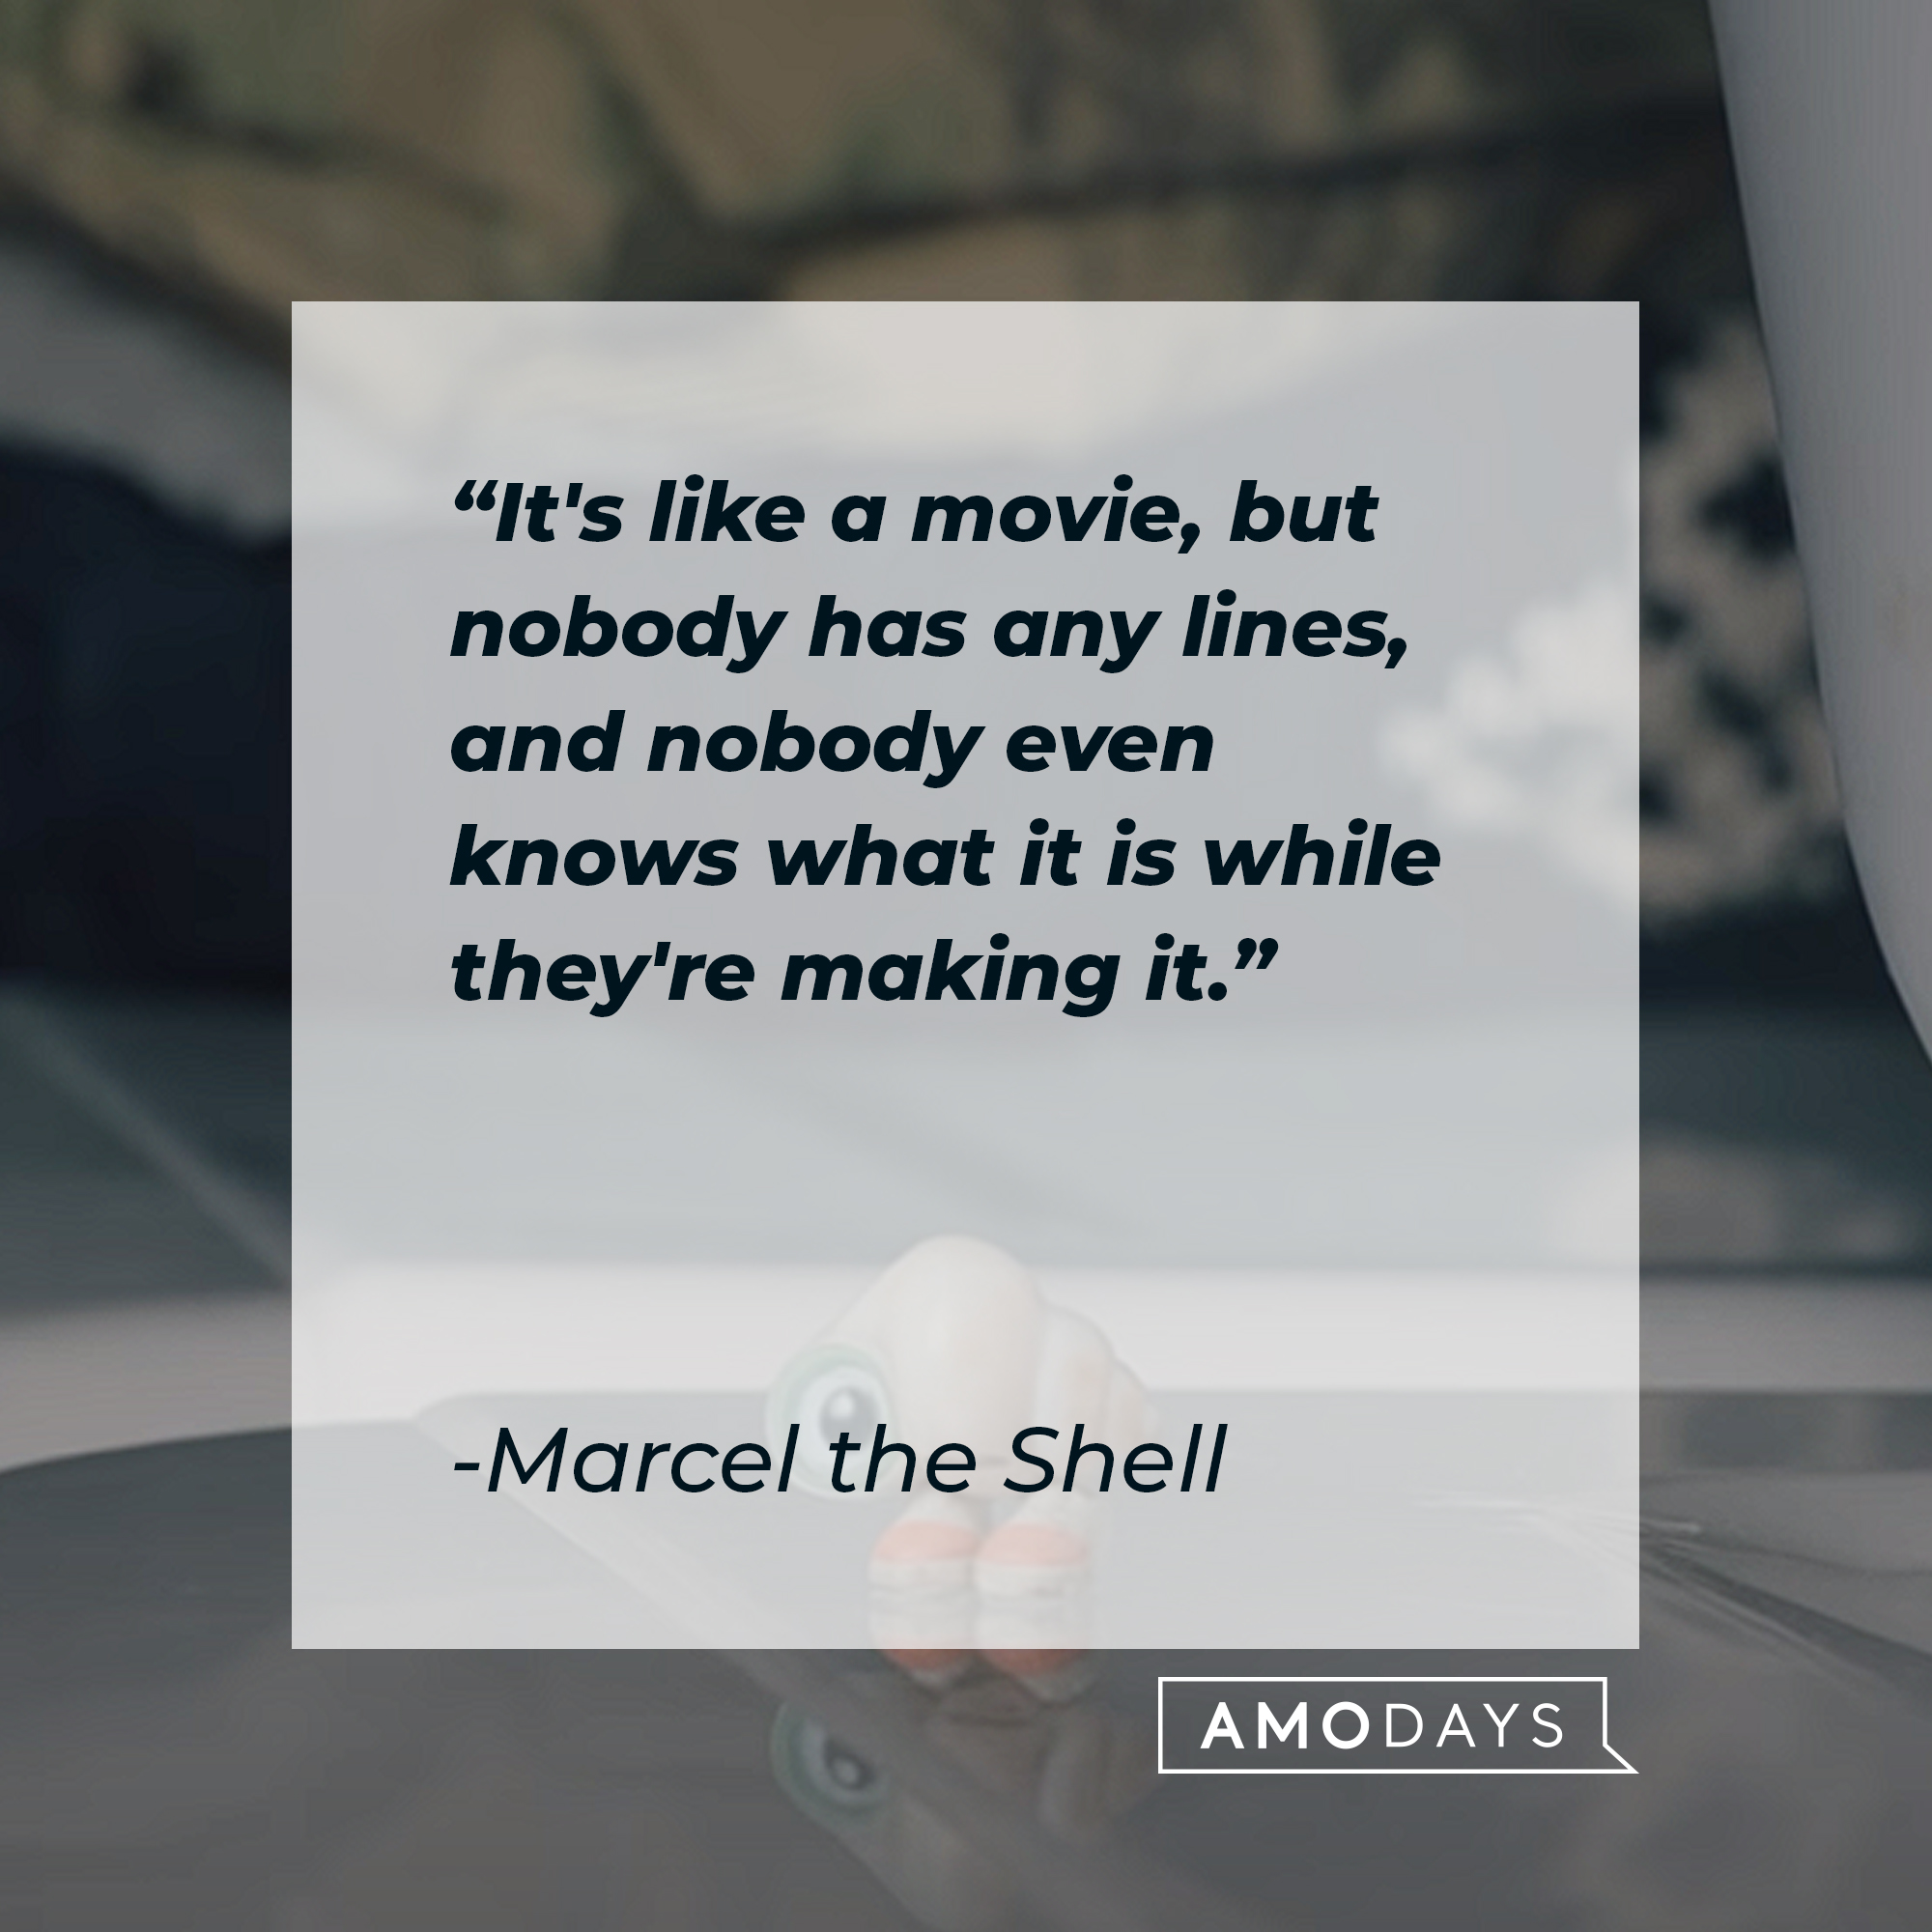 Marcel the Shell's quote: “It's like a movie, but nobody has any lines, and nobody even knows what it is while they're making it.” | Source: youtube.com/A24